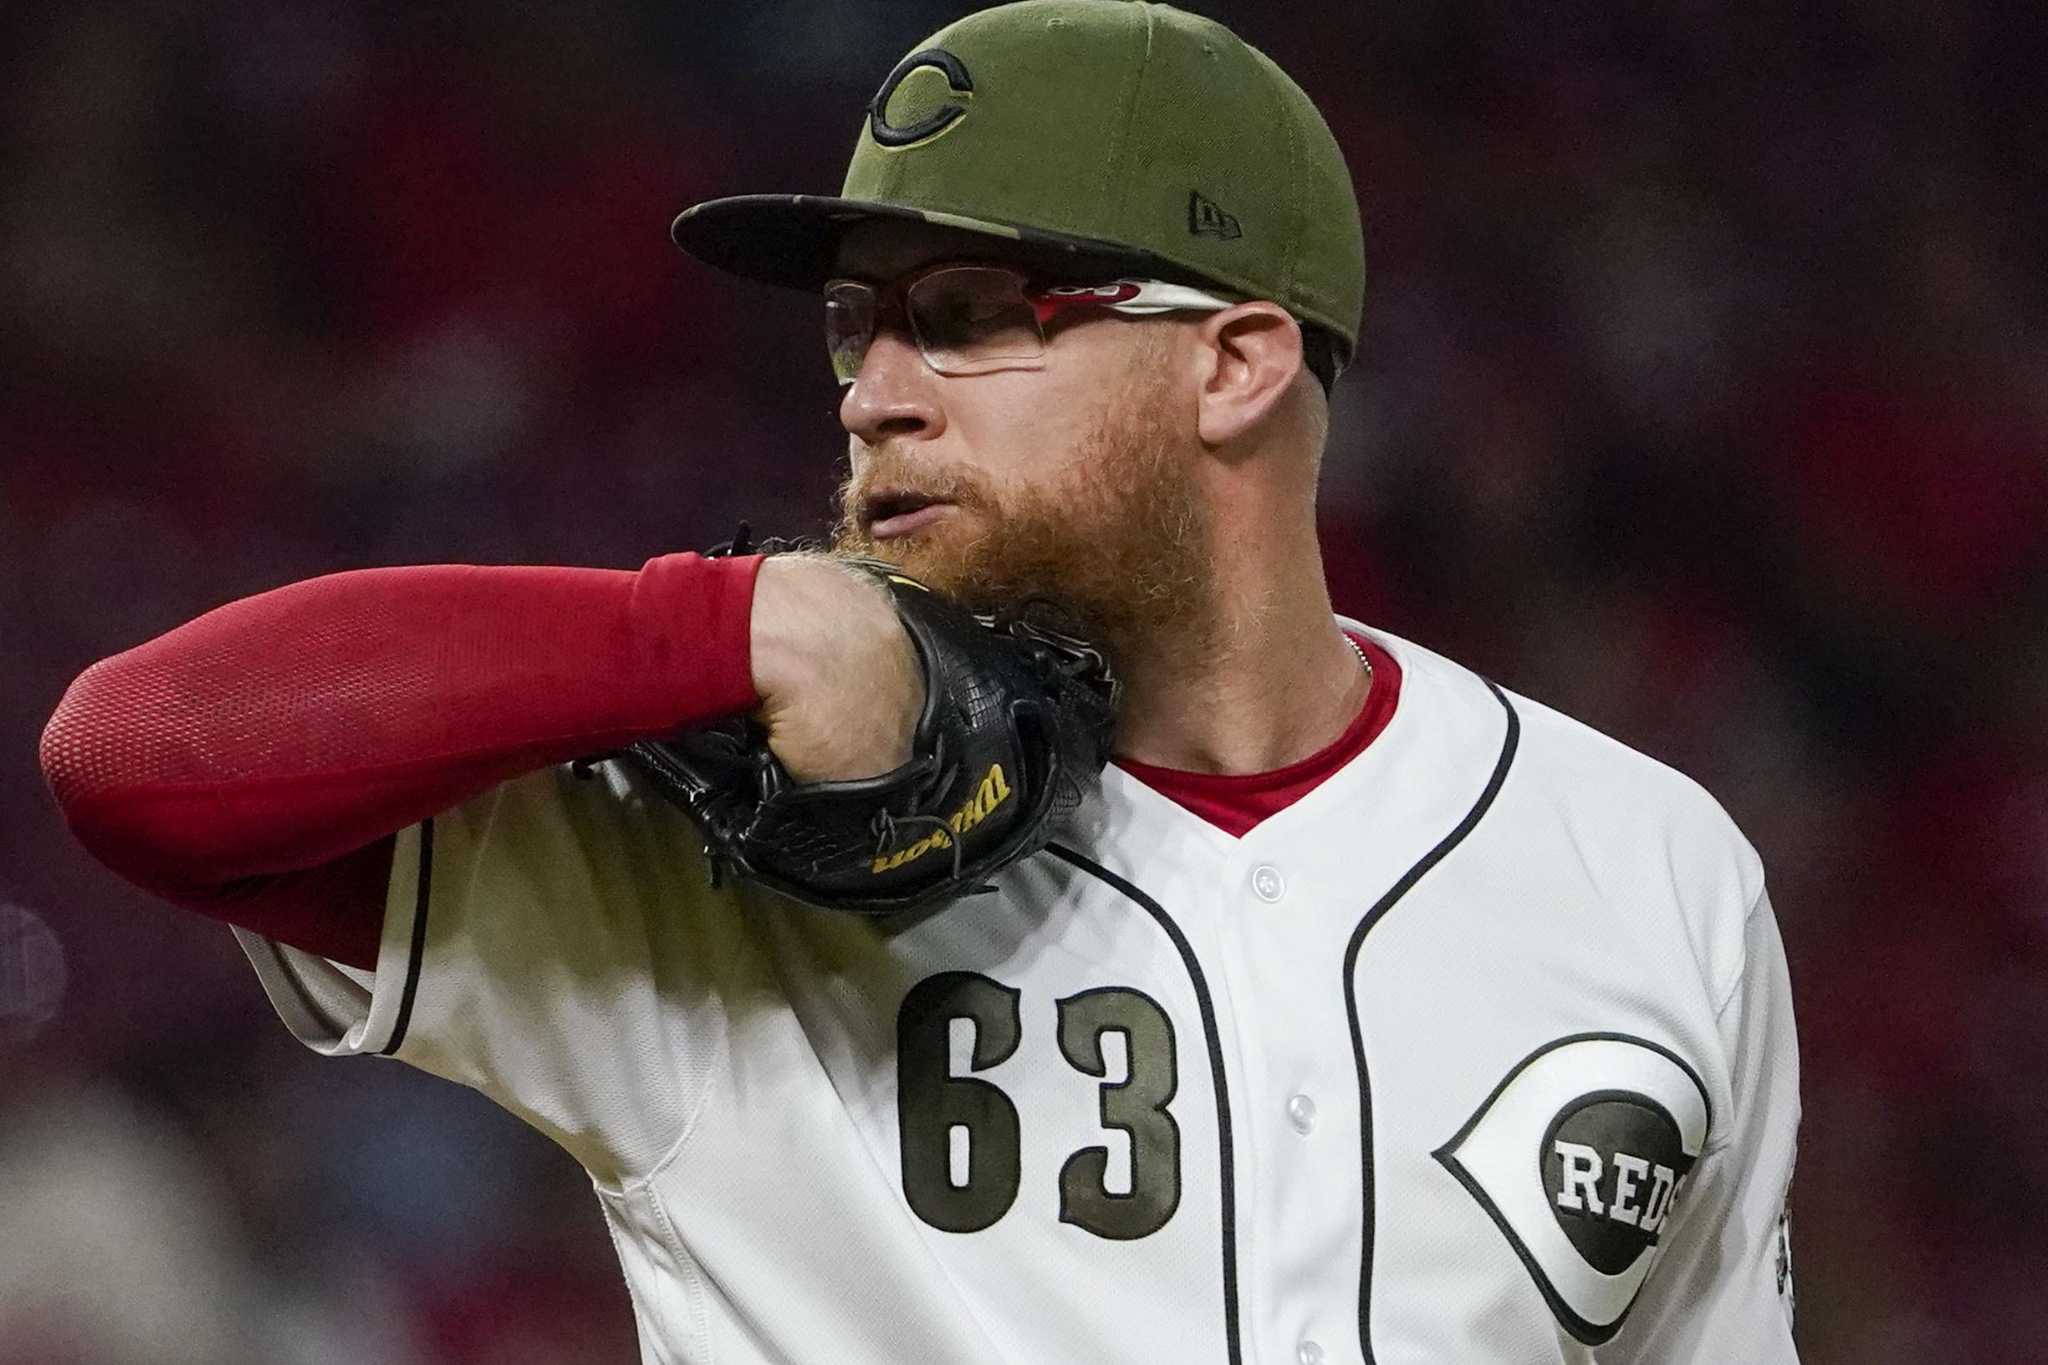 Dropped by Reds, former A's closer Sean Doolittle lands job with Mariners